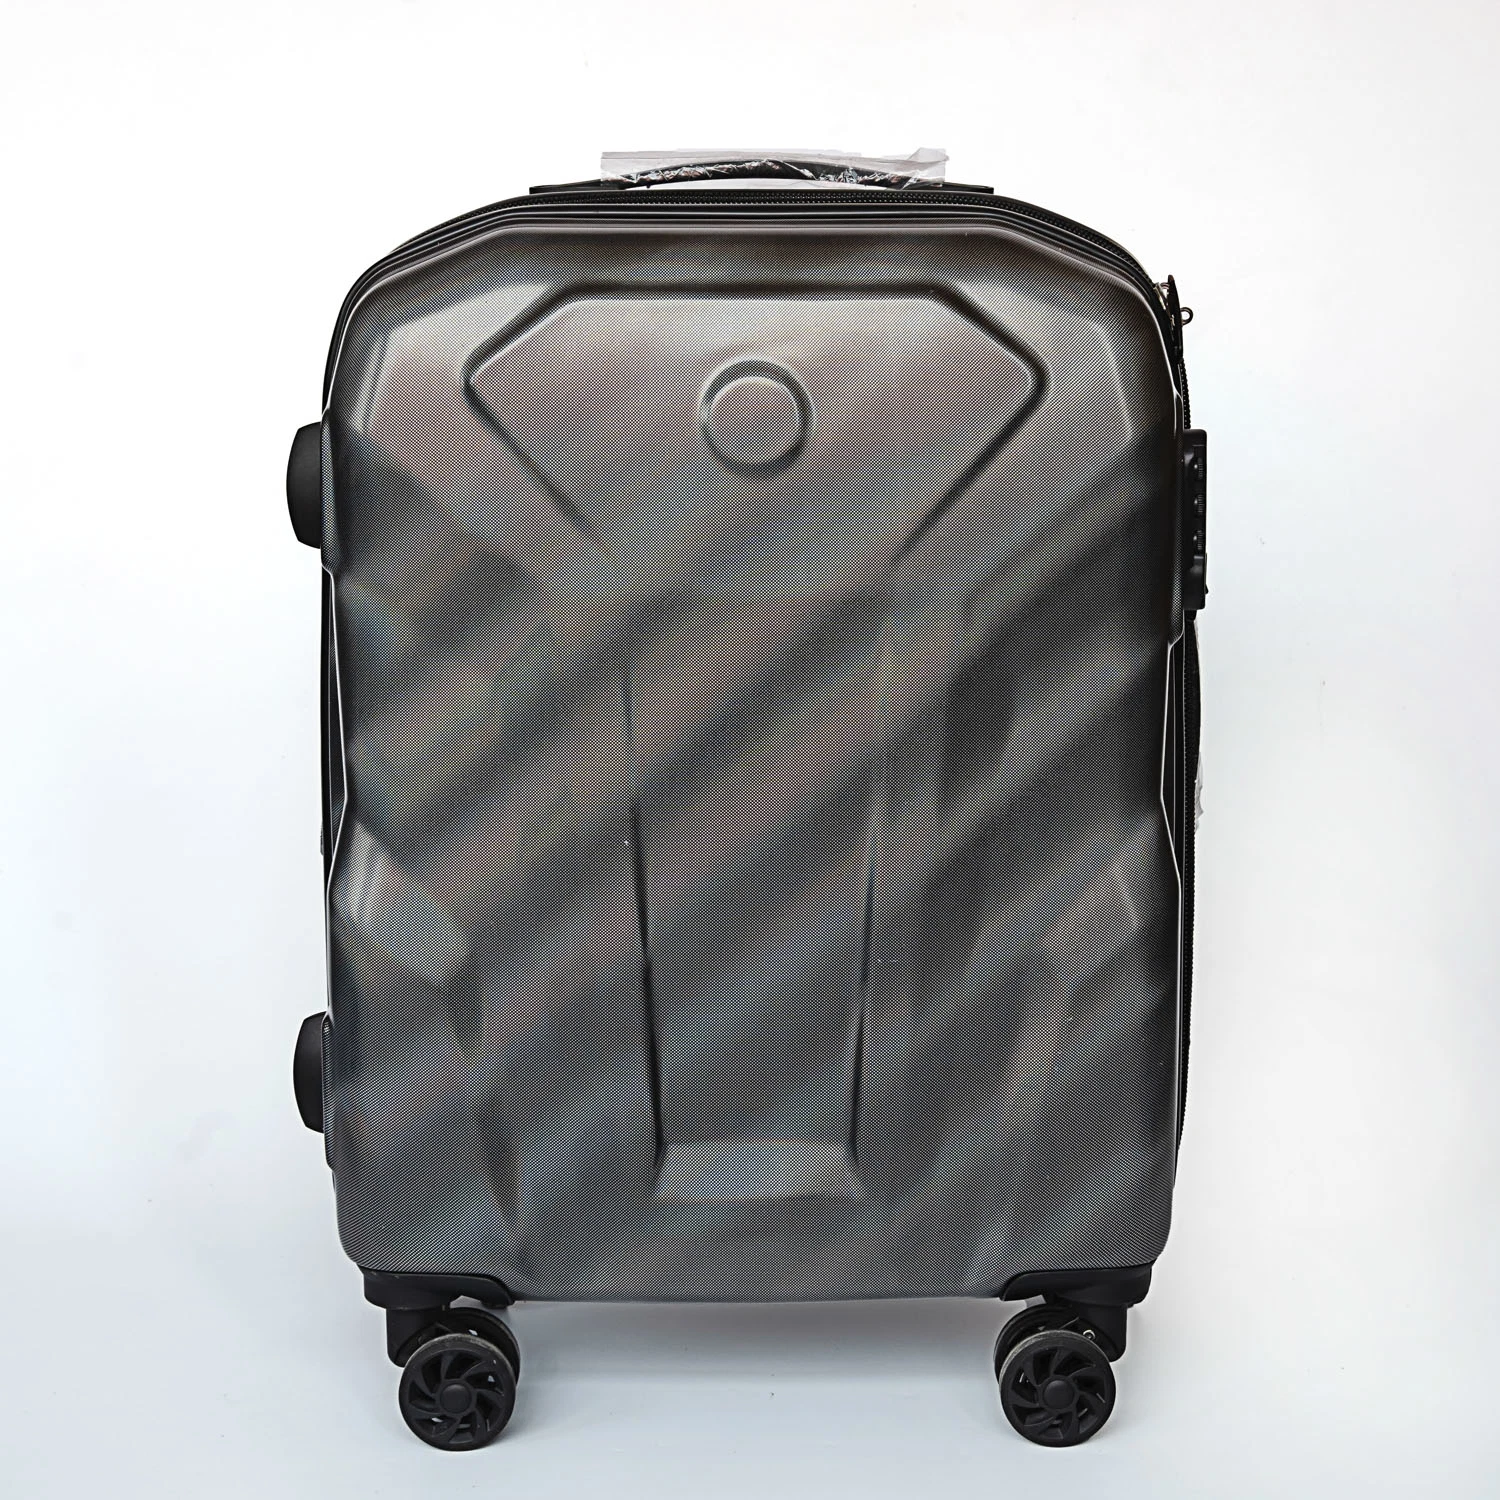 High Quality Luggage Bag,Airplane Trolley Case Smart Suitcase PP Travel Luggage - Buy Luggage Bag,Airplane Trolley Case,Smart Suitcase Product on Alibaba.COM